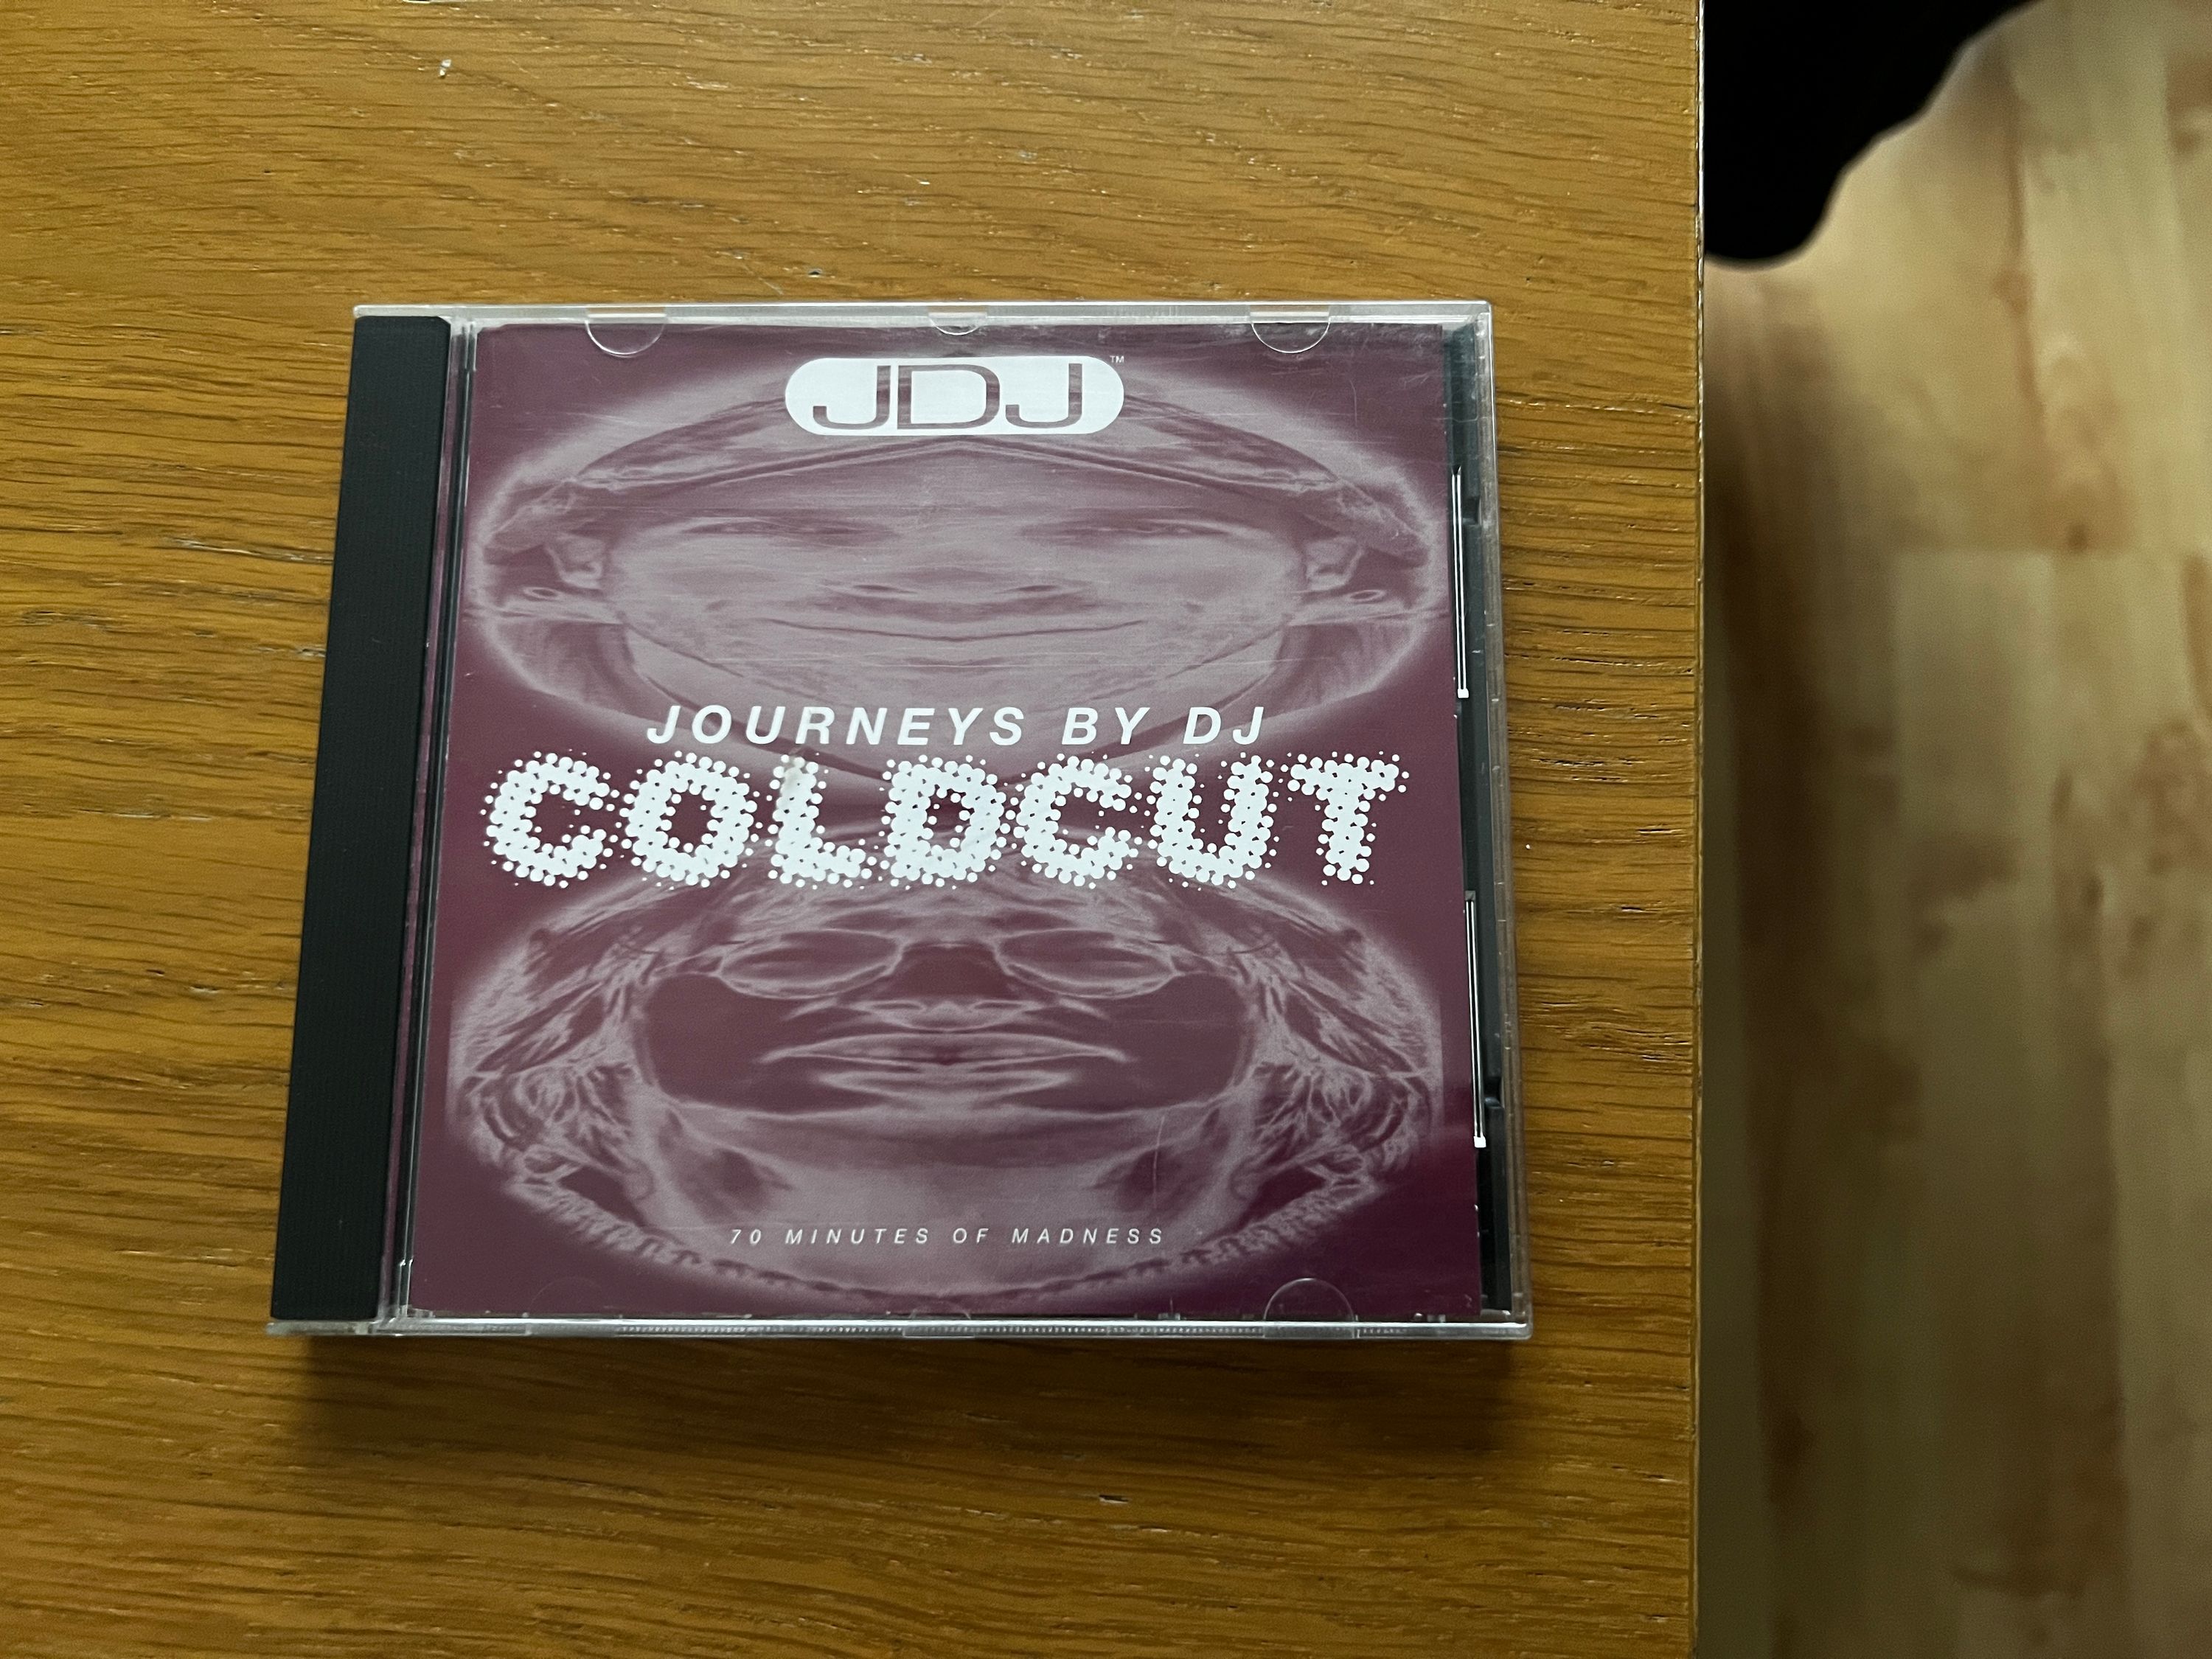 Coldcut - Journeys by DJ